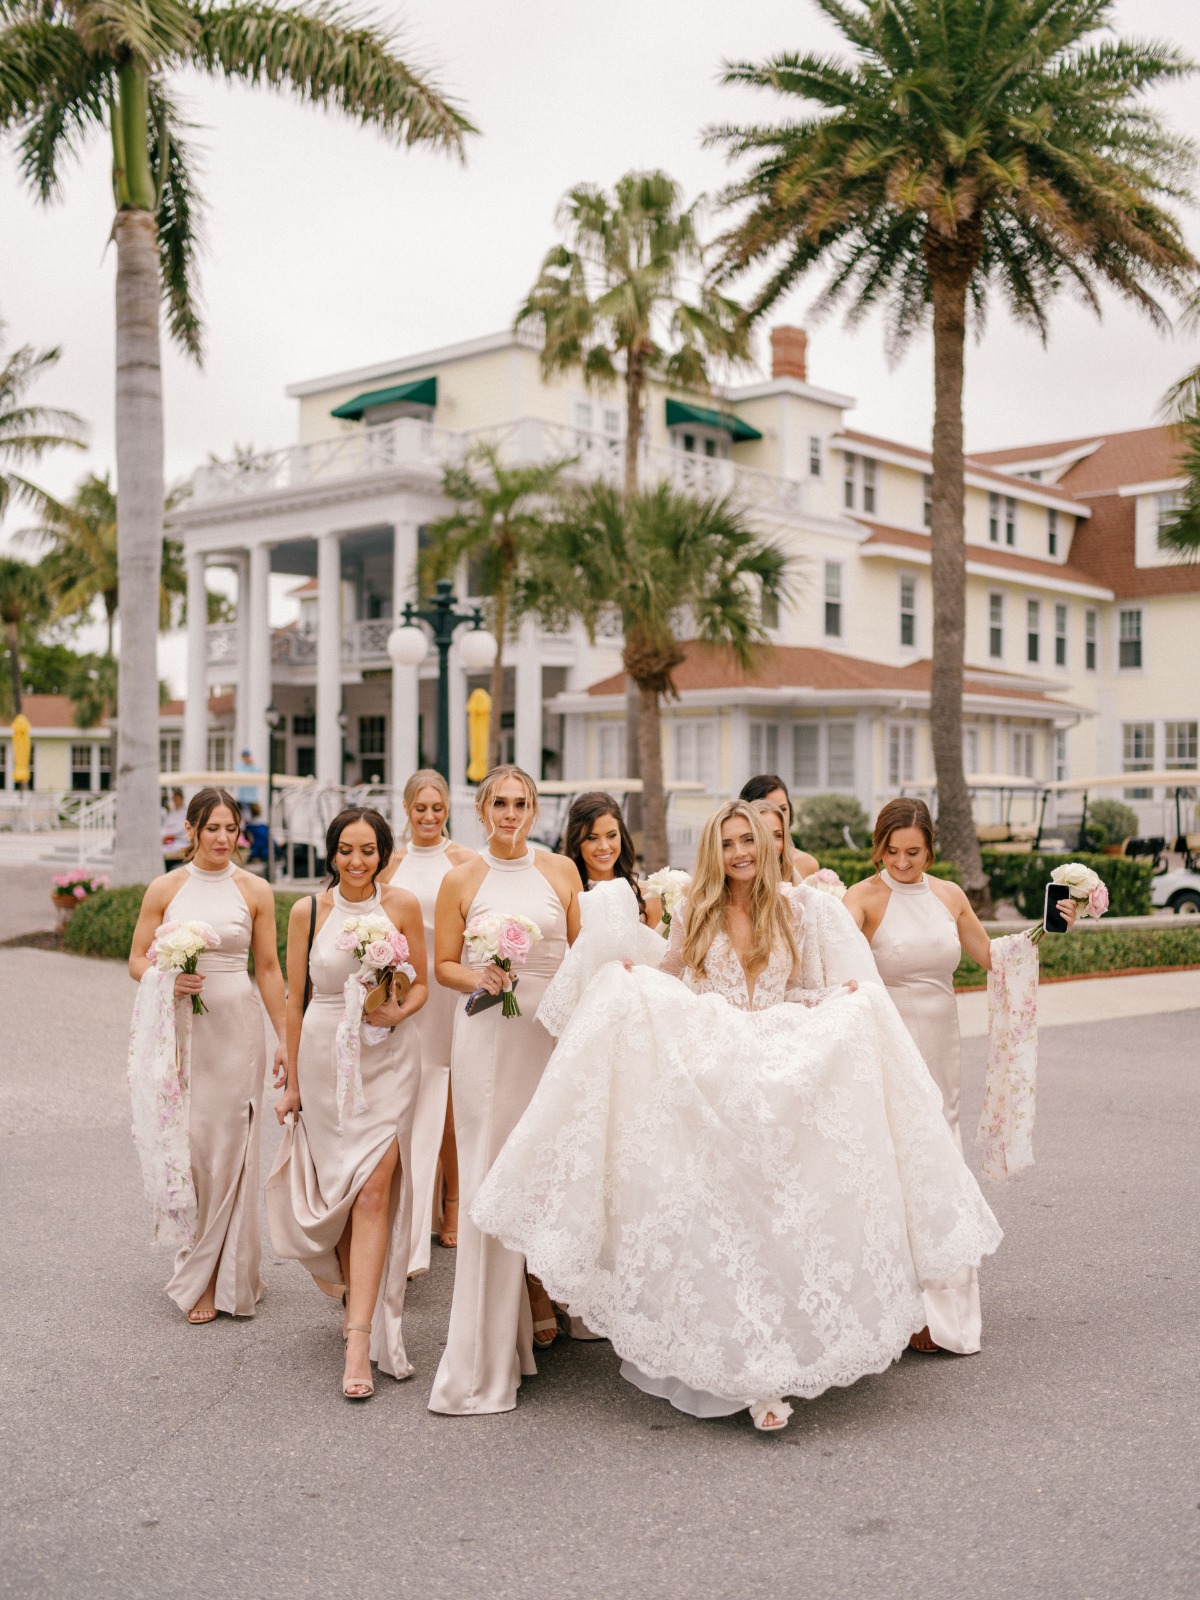 Bride walking with bridesmaids holding her dress up